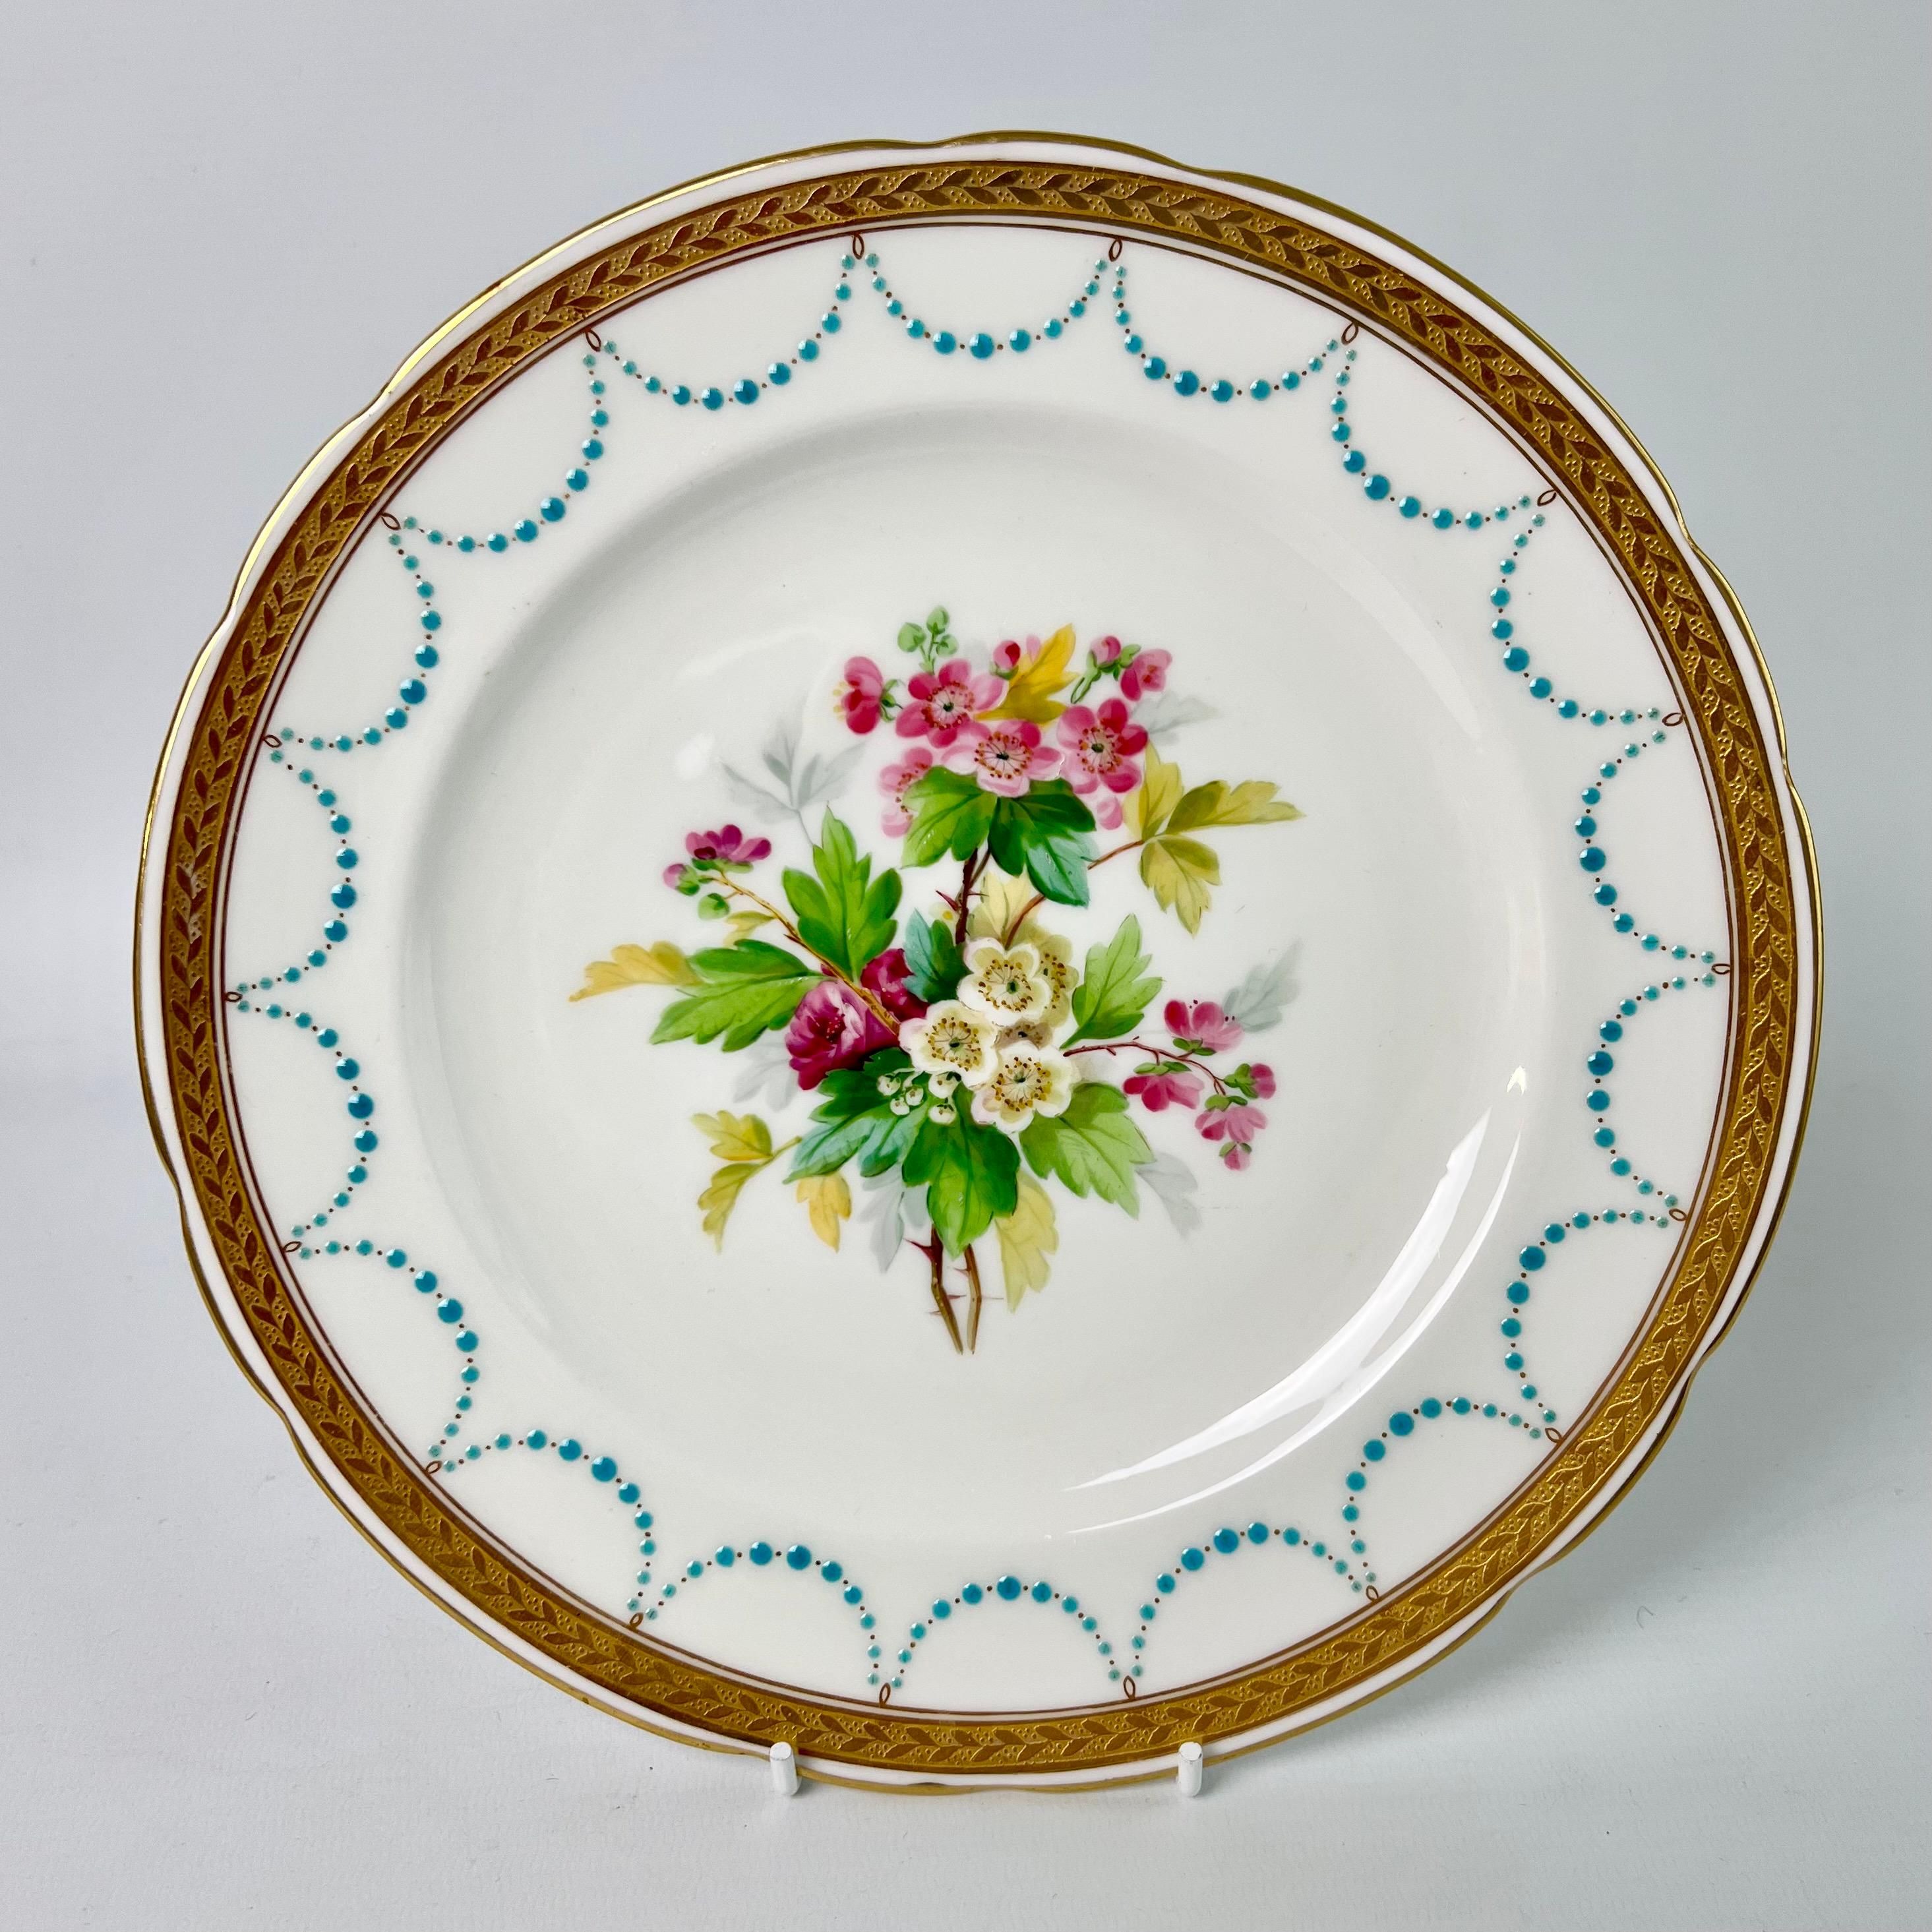 Minton Porcelain Dessert Service, Turquoise and Gilt, Flowers and Fruits, 1870 10